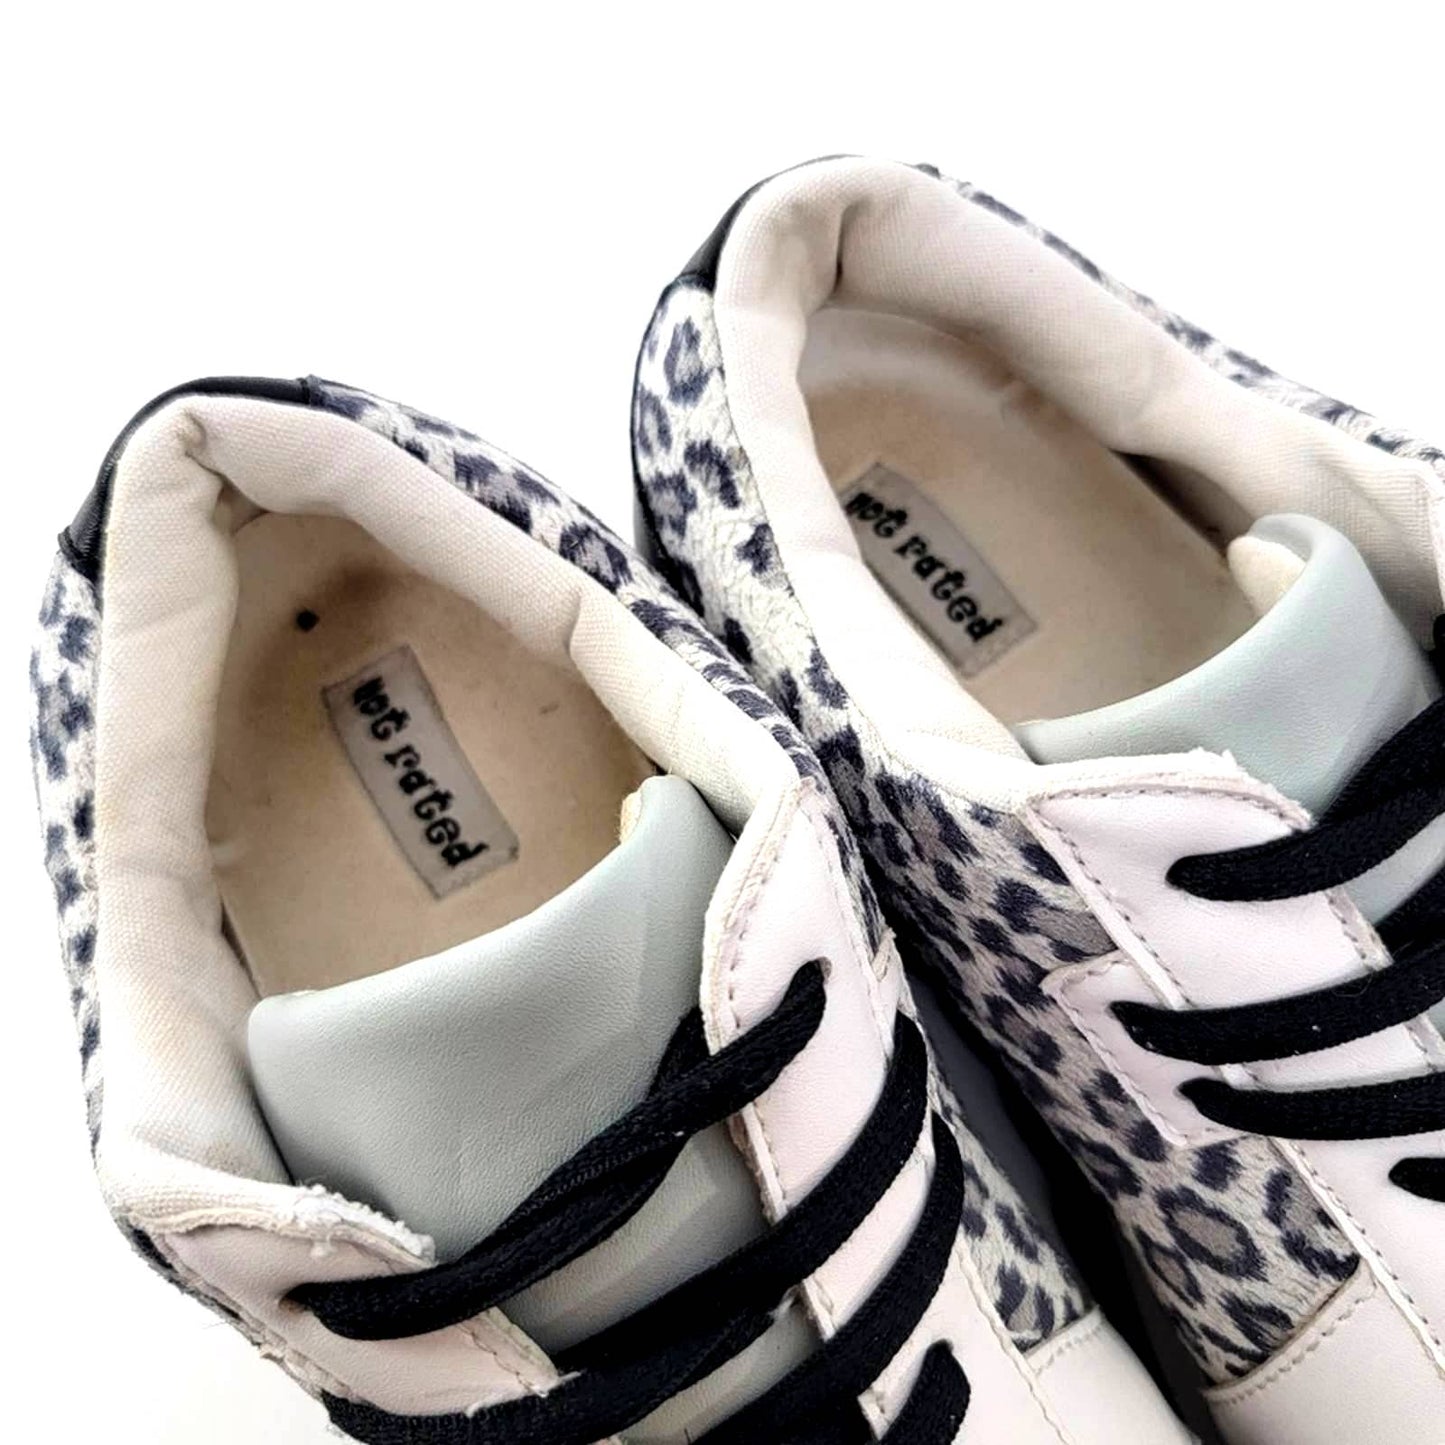 Not Rated Chunky Platform Sneakers - Leopard Cheetah Print - 9.5